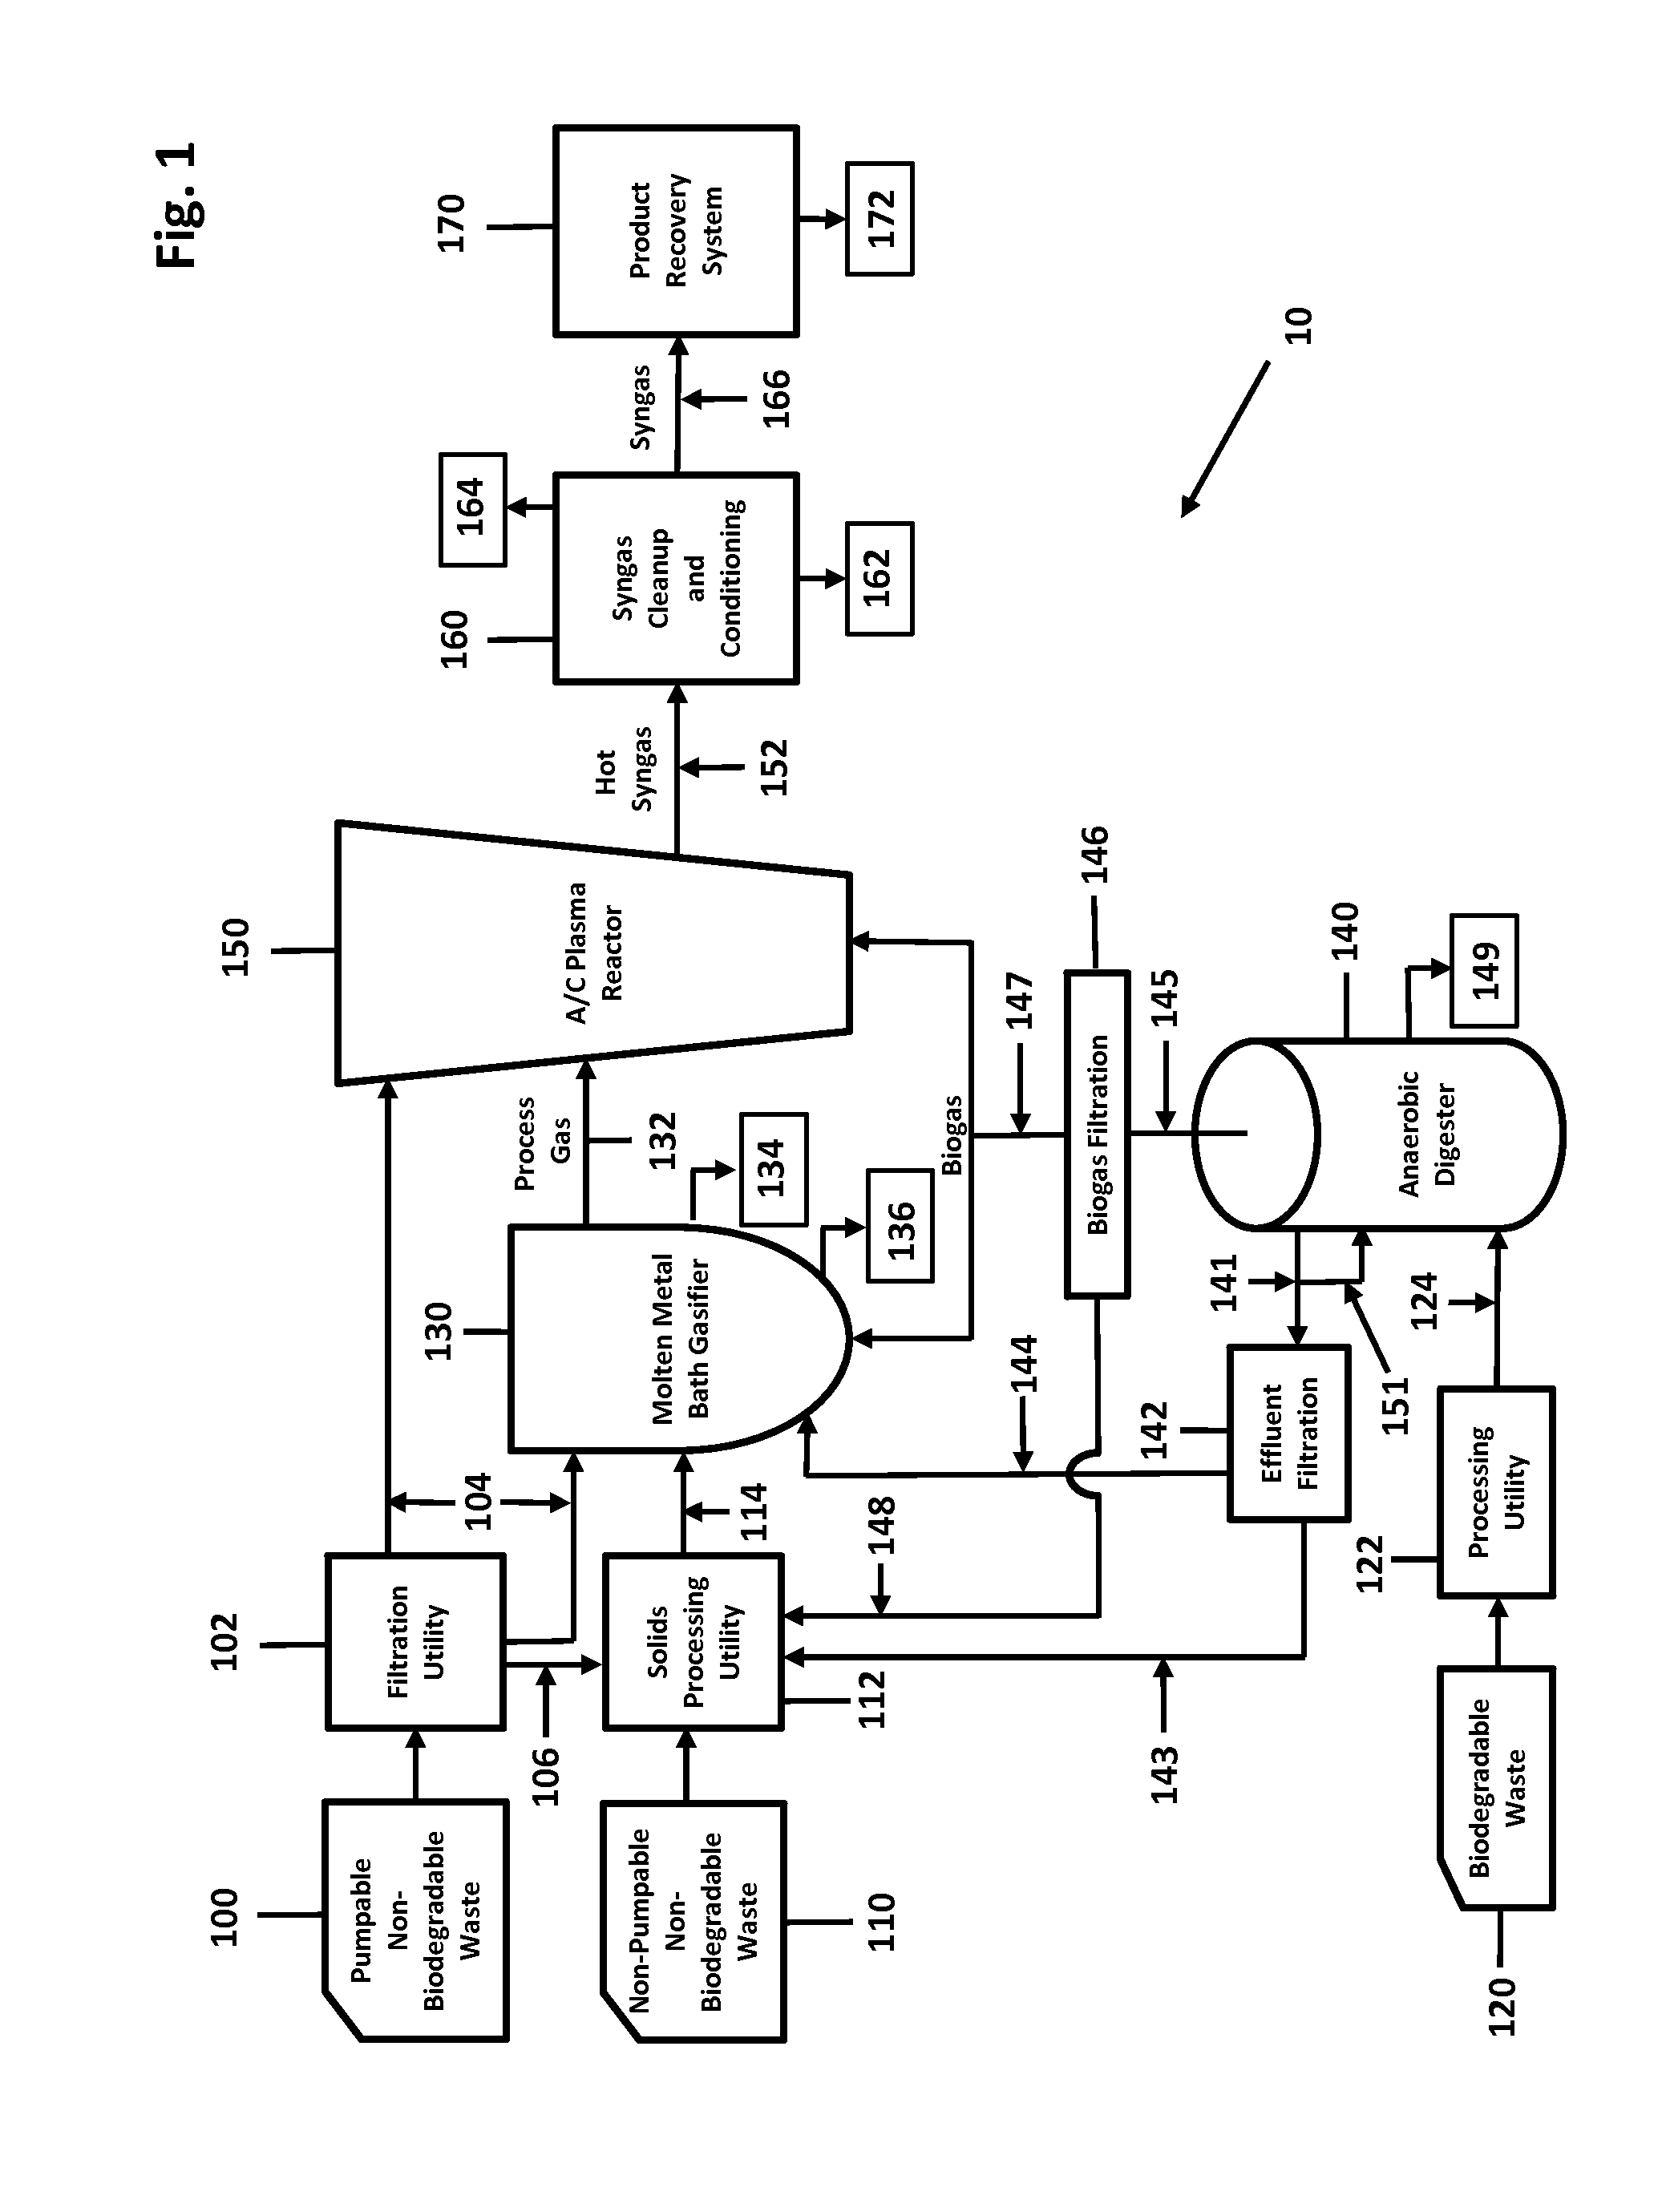 System And Method For Producing A Consistent Quality Syngas From Diverse Waste Materials With Heat Recovery Based Power Generation, And Renewable Hydrogen Co-Production